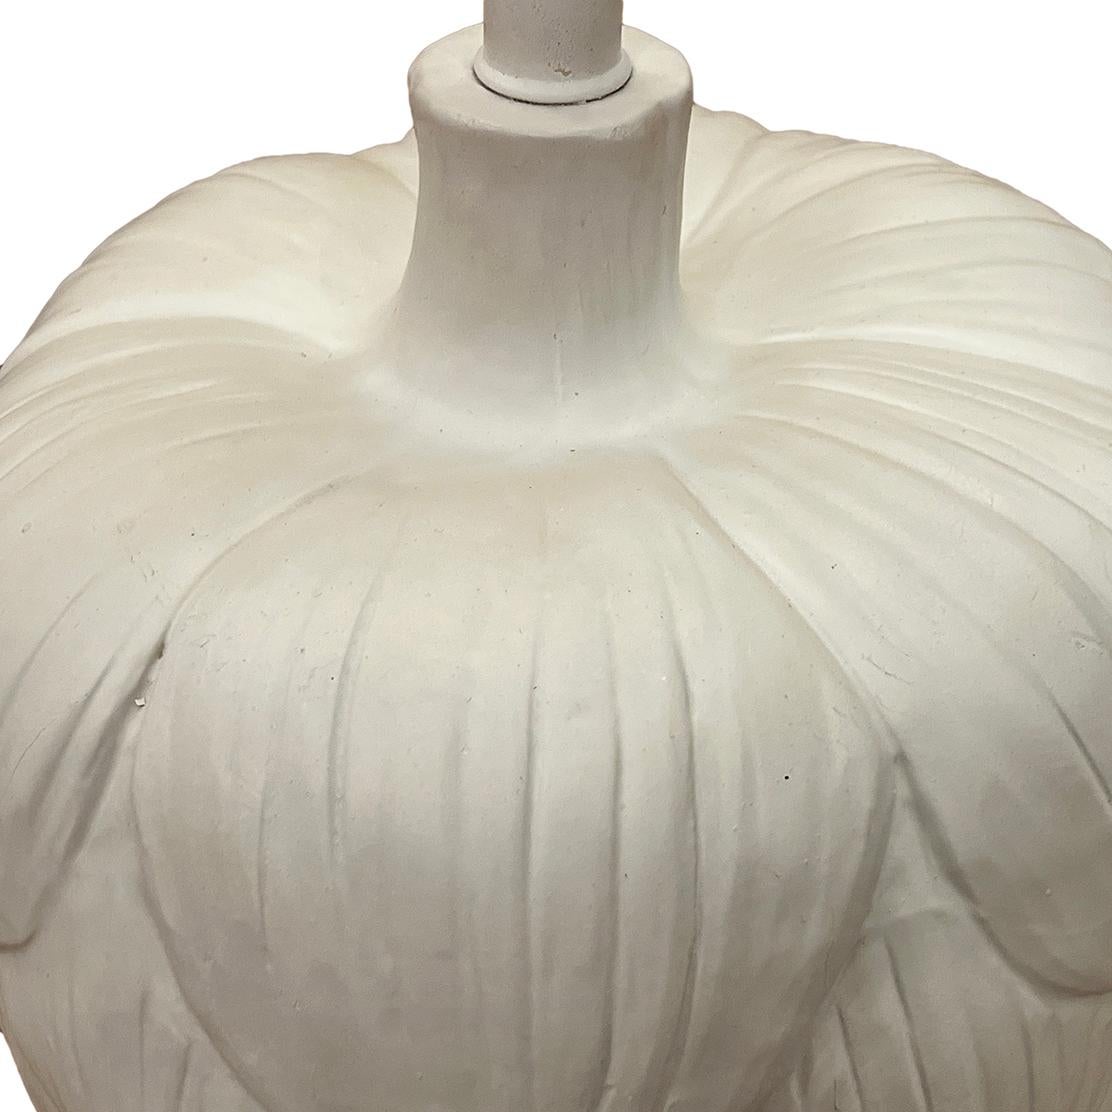 Midcentury French Plaster Table Lamp In Good Condition For Sale In New York, NY